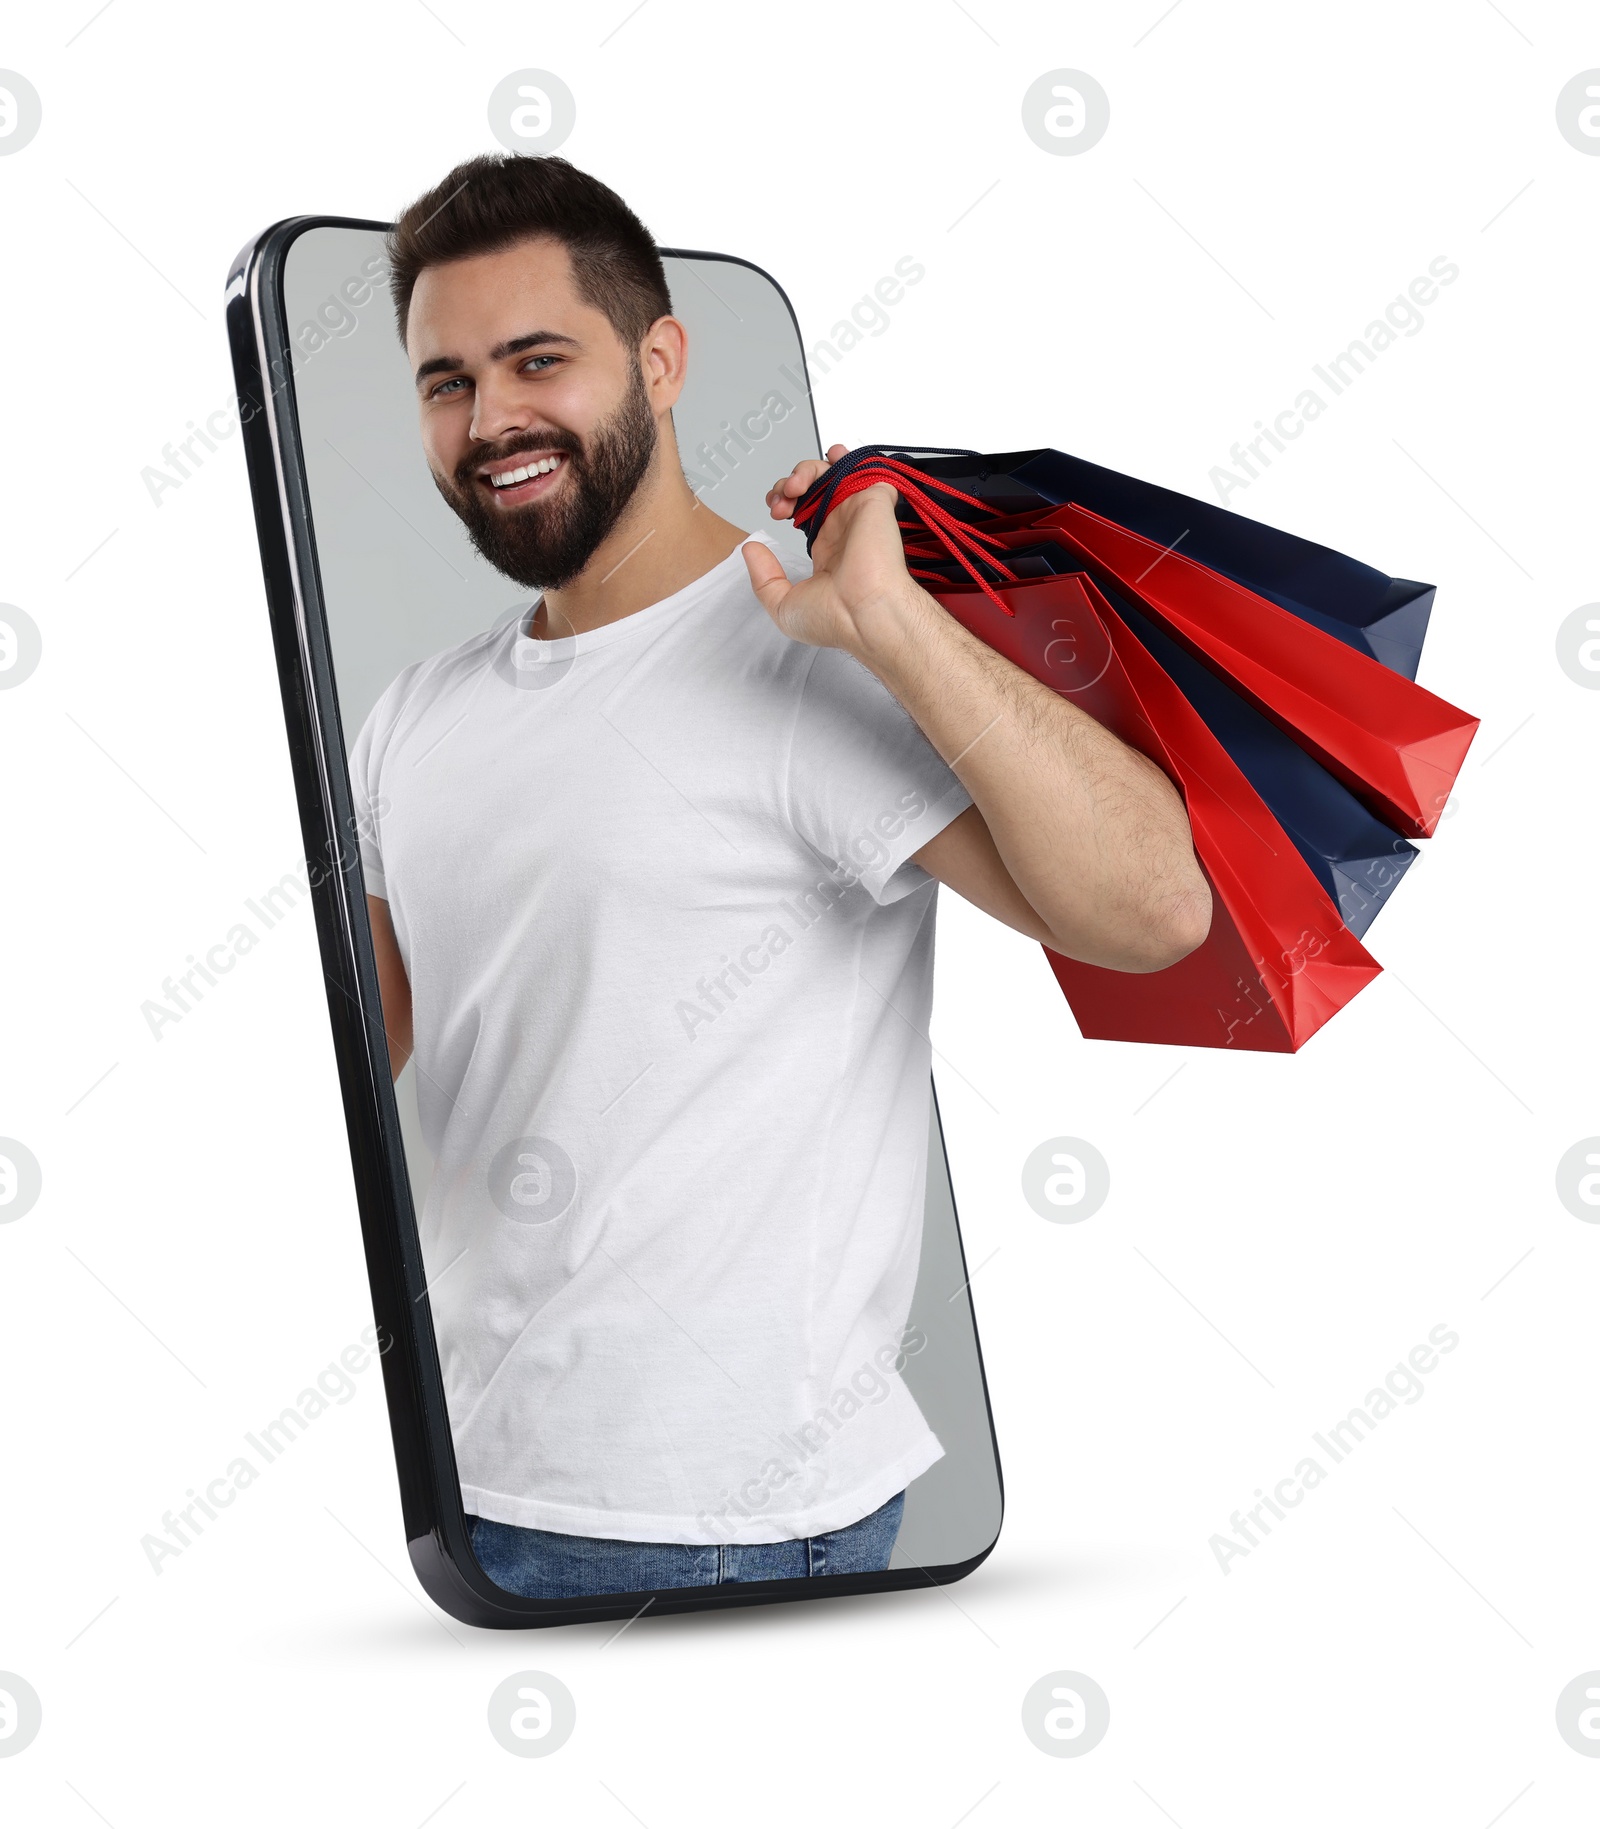 Image of Online shopping. Happy man with paper bags looking out from smartphone on white background